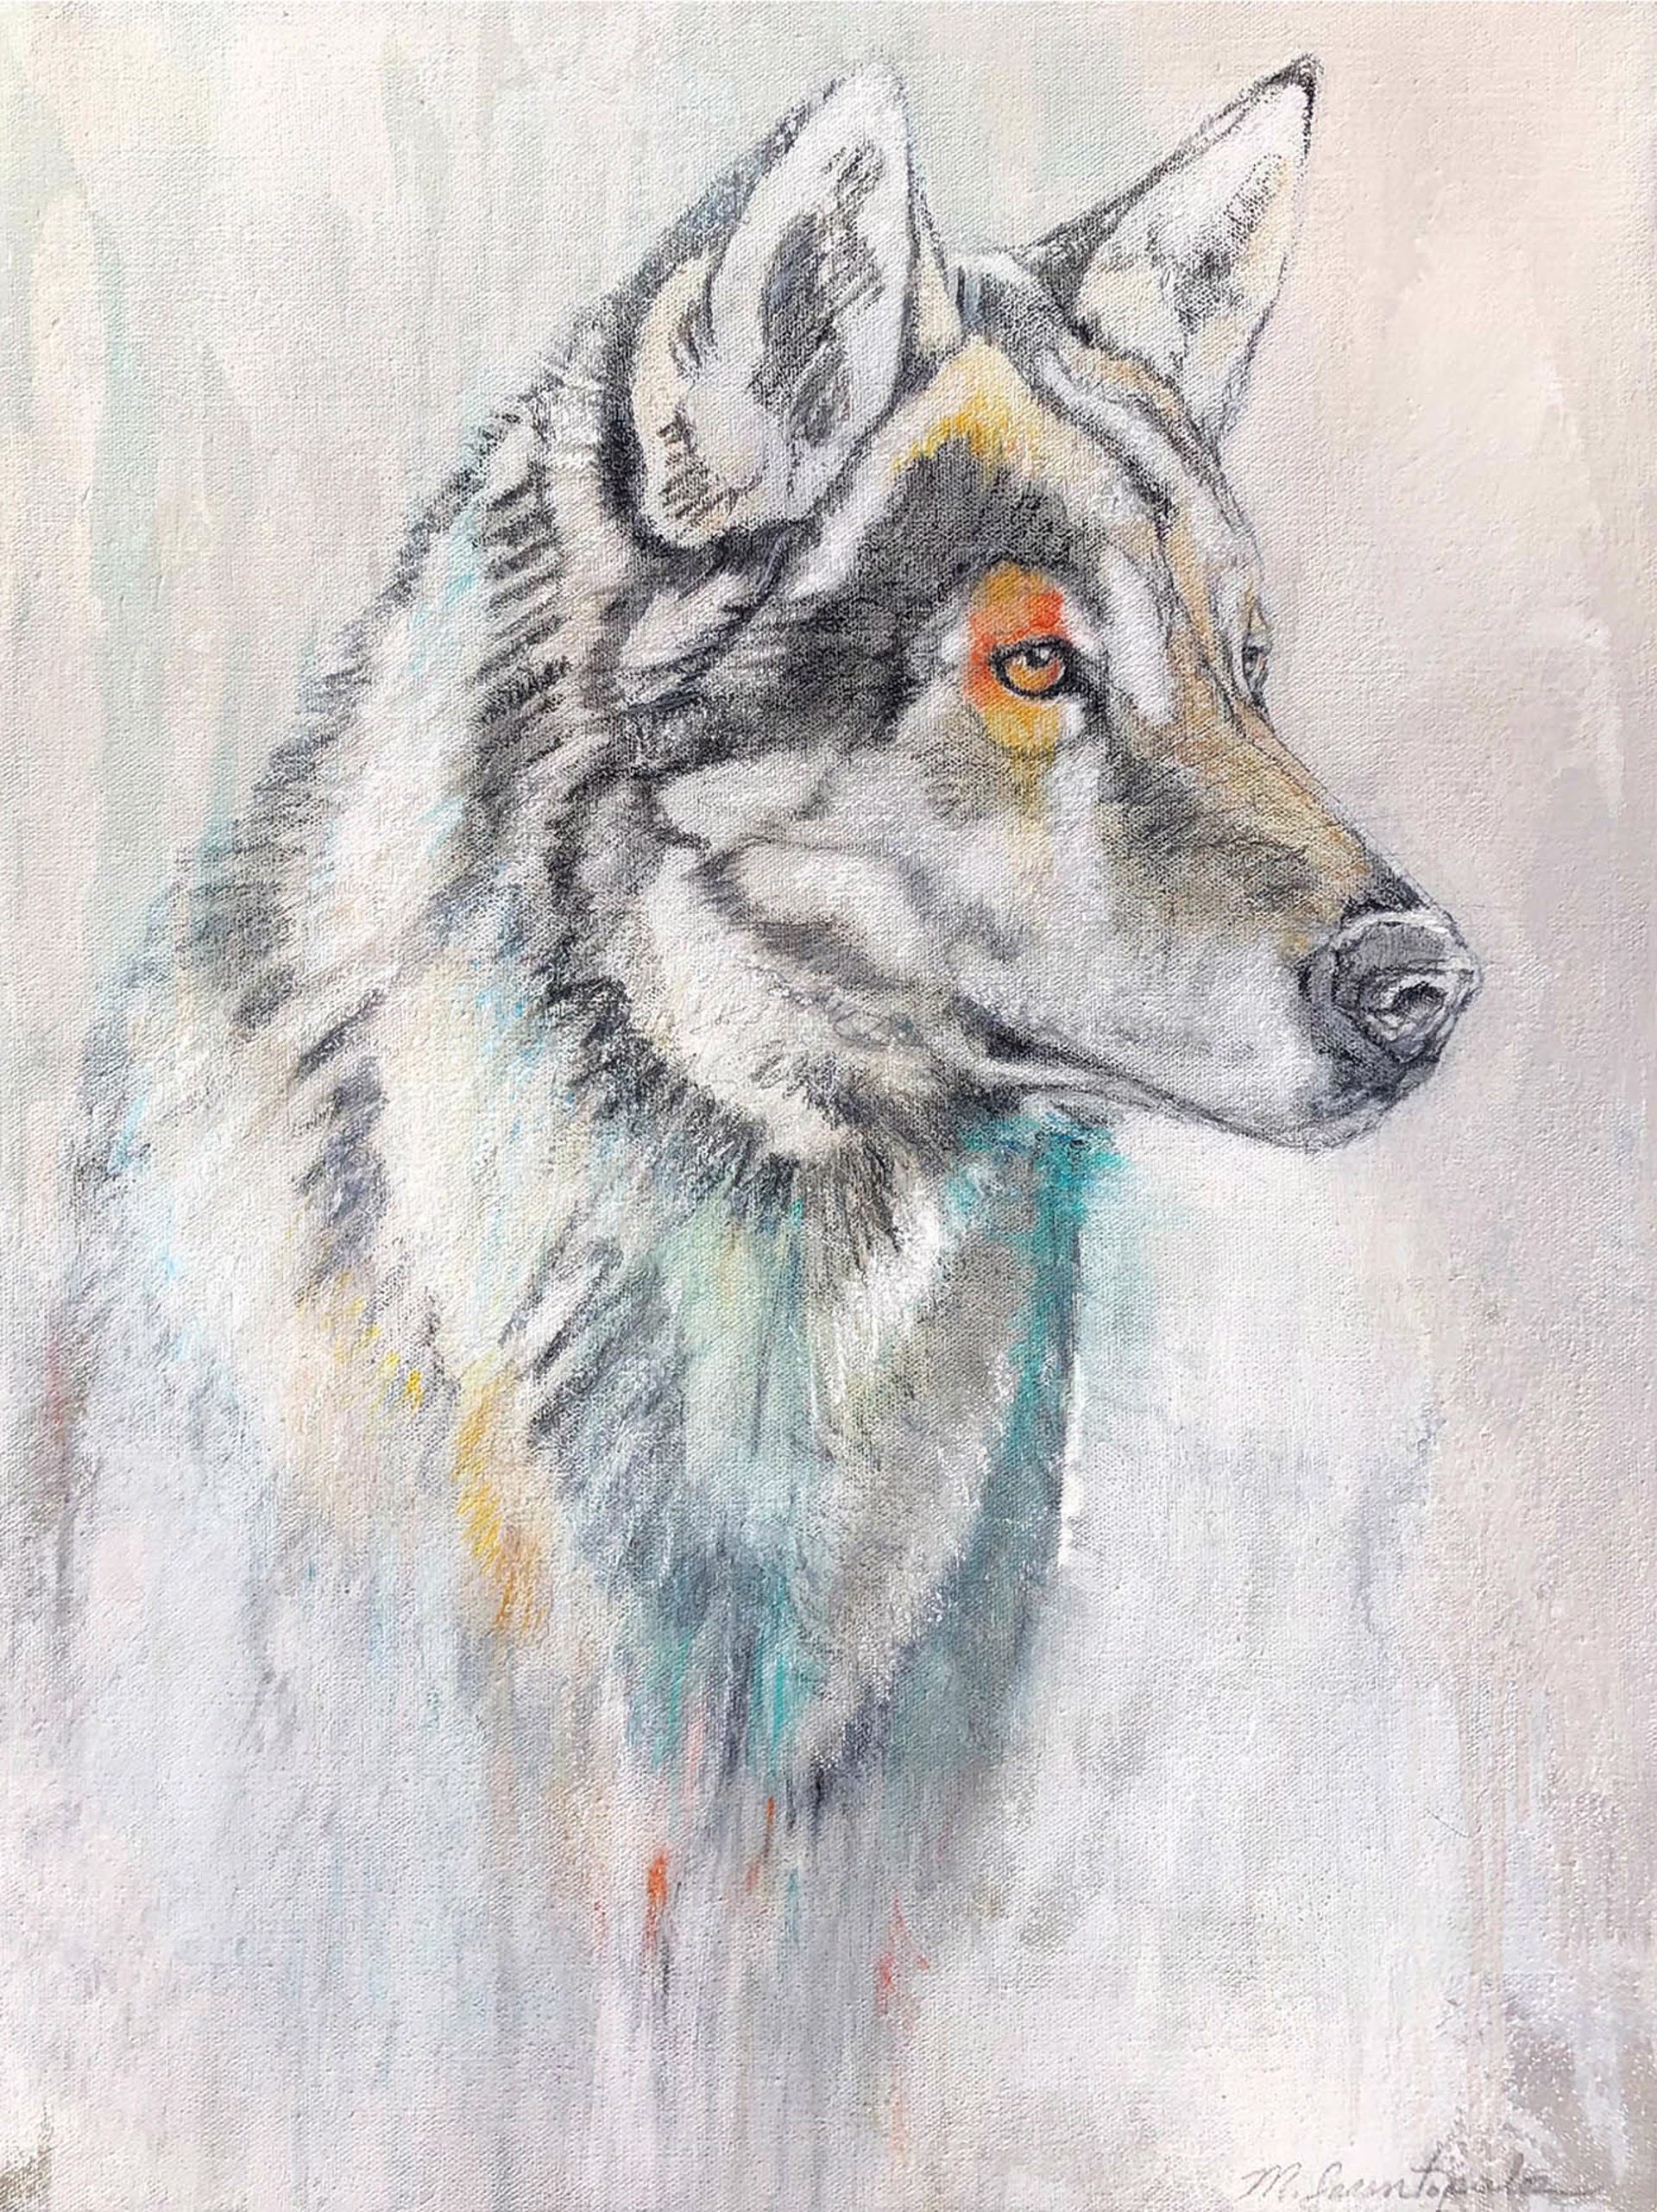 Original Mixed Media Painting Featuring A Wolf Portrait In Grays With Gray Wash Background And Orange Highlight Over Eye